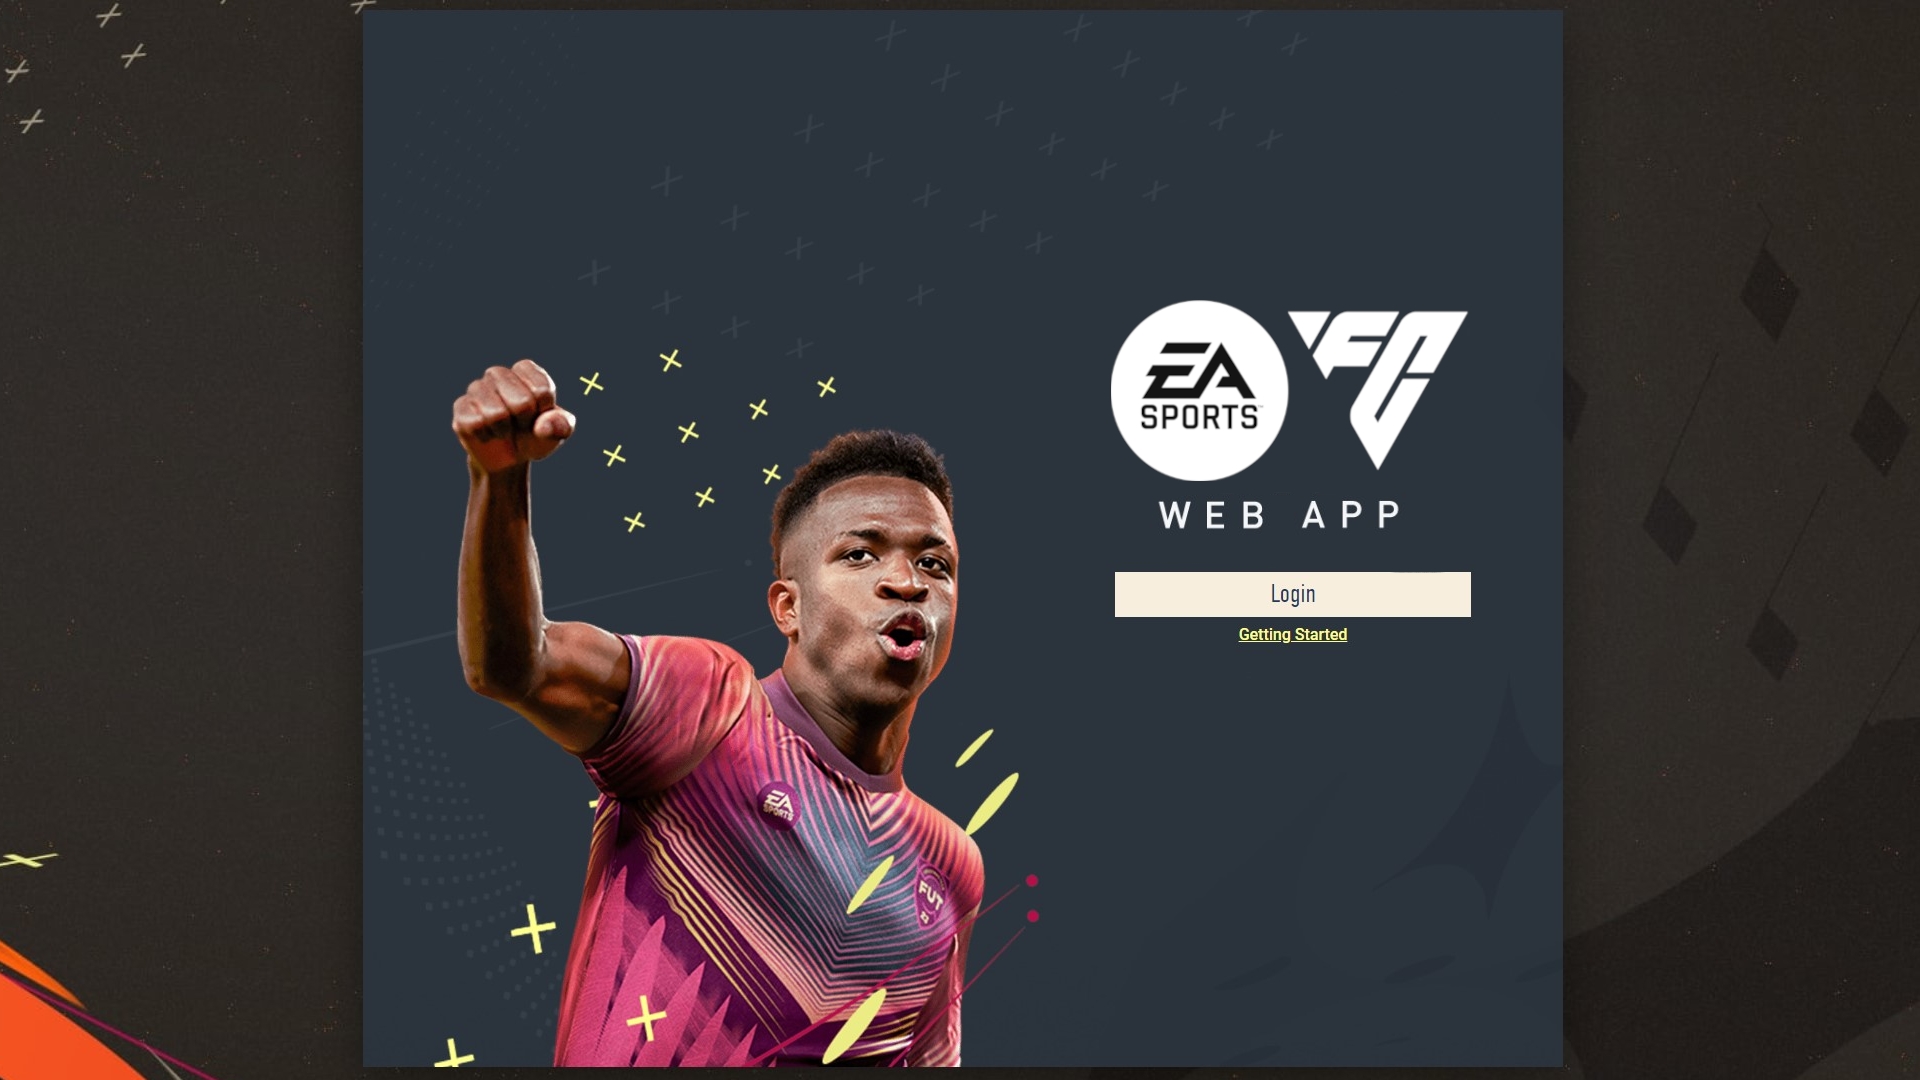 EA FC 24 Web App: Release Date, Time, Features & How to Access